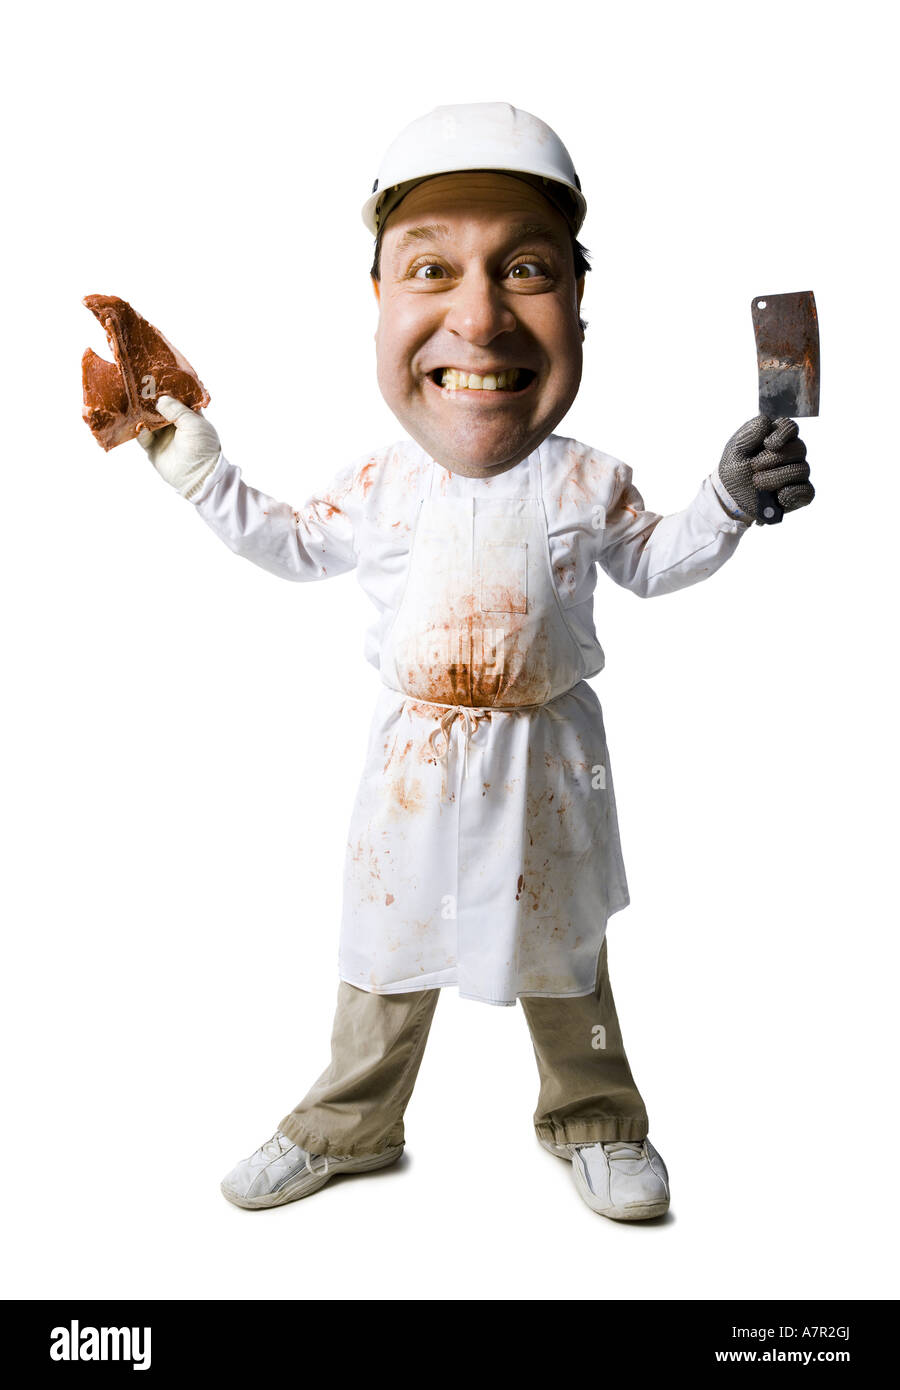 Caricature of butcher standing with knife and steak smiling Stock Photo